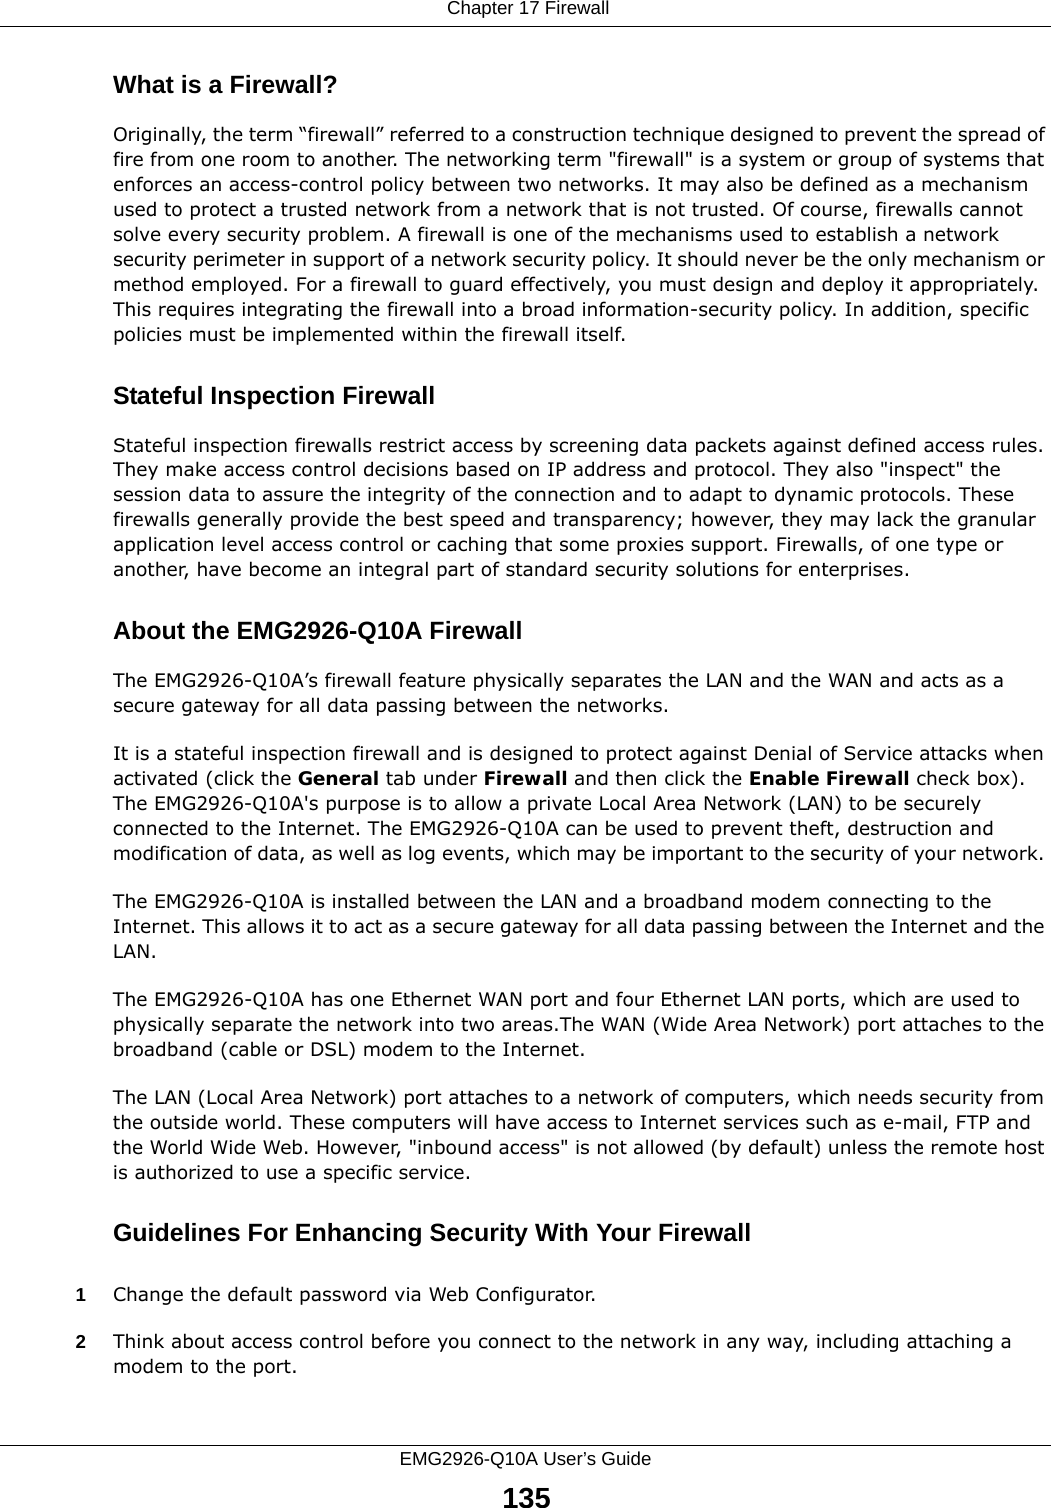  Chapter 17 FirewallEMG2926-Q10A User’s Guide135What is a Firewall?Originally, the term “firewall” referred to a construction technique designed to prevent the spread of fire from one room to another. The networking term &quot;firewall&quot; is a system or group of systems that enforces an access-control policy between two networks. It may also be defined as a mechanism used to protect a trusted network from a network that is not trusted. Of course, firewalls cannot solve every security problem. A firewall is one of the mechanisms used to establish a network security perimeter in support of a network security policy. It should never be the only mechanism or method employed. For a firewall to guard effectively, you must design and deploy it appropriately. This requires integrating the firewall into a broad information-security policy. In addition, specific policies must be implemented within the firewall itself. Stateful Inspection Firewall Stateful inspection firewalls restrict access by screening data packets against defined access rules. They make access control decisions based on IP address and protocol. They also &quot;inspect&quot; the session data to assure the integrity of the connection and to adapt to dynamic protocols. These firewalls generally provide the best speed and transparency; however, they may lack the granular application level access control or caching that some proxies support. Firewalls, of one type or another, have become an integral part of standard security solutions for enterprises.About the EMG2926-Q10A FirewallThe EMG2926-Q10A’s firewall feature physically separates the LAN and the WAN and acts as a secure gateway for all data passing between the networks.It is a stateful inspection firewall and is designed to protect against Denial of Service attacks when activated (click the General tab under Firewall and then click the Enable Firewall check box). The EMG2926-Q10A&apos;s purpose is to allow a private Local Area Network (LAN) to be securely connected to the Internet. The EMG2926-Q10A can be used to prevent theft, destruction and modification of data, as well as log events, which may be important to the security of your network. The EMG2926-Q10A is installed between the LAN and a broadband modem connecting to the Internet. This allows it to act as a secure gateway for all data passing between the Internet and the LAN.The EMG2926-Q10A has one Ethernet WAN port and four Ethernet LAN ports, which are used to physically separate the network into two areas.The WAN (Wide Area Network) port attaches to the broadband (cable or DSL) modem to the Internet.The LAN (Local Area Network) port attaches to a network of computers, which needs security from the outside world. These computers will have access to Internet services such as e-mail, FTP and the World Wide Web. However, &quot;inbound access&quot; is not allowed (by default) unless the remote host is authorized to use a specific service.Guidelines For Enhancing Security With Your Firewall1Change the default password via Web Configurator. 2Think about access control before you connect to the network in any way, including attaching a modem to the port. 